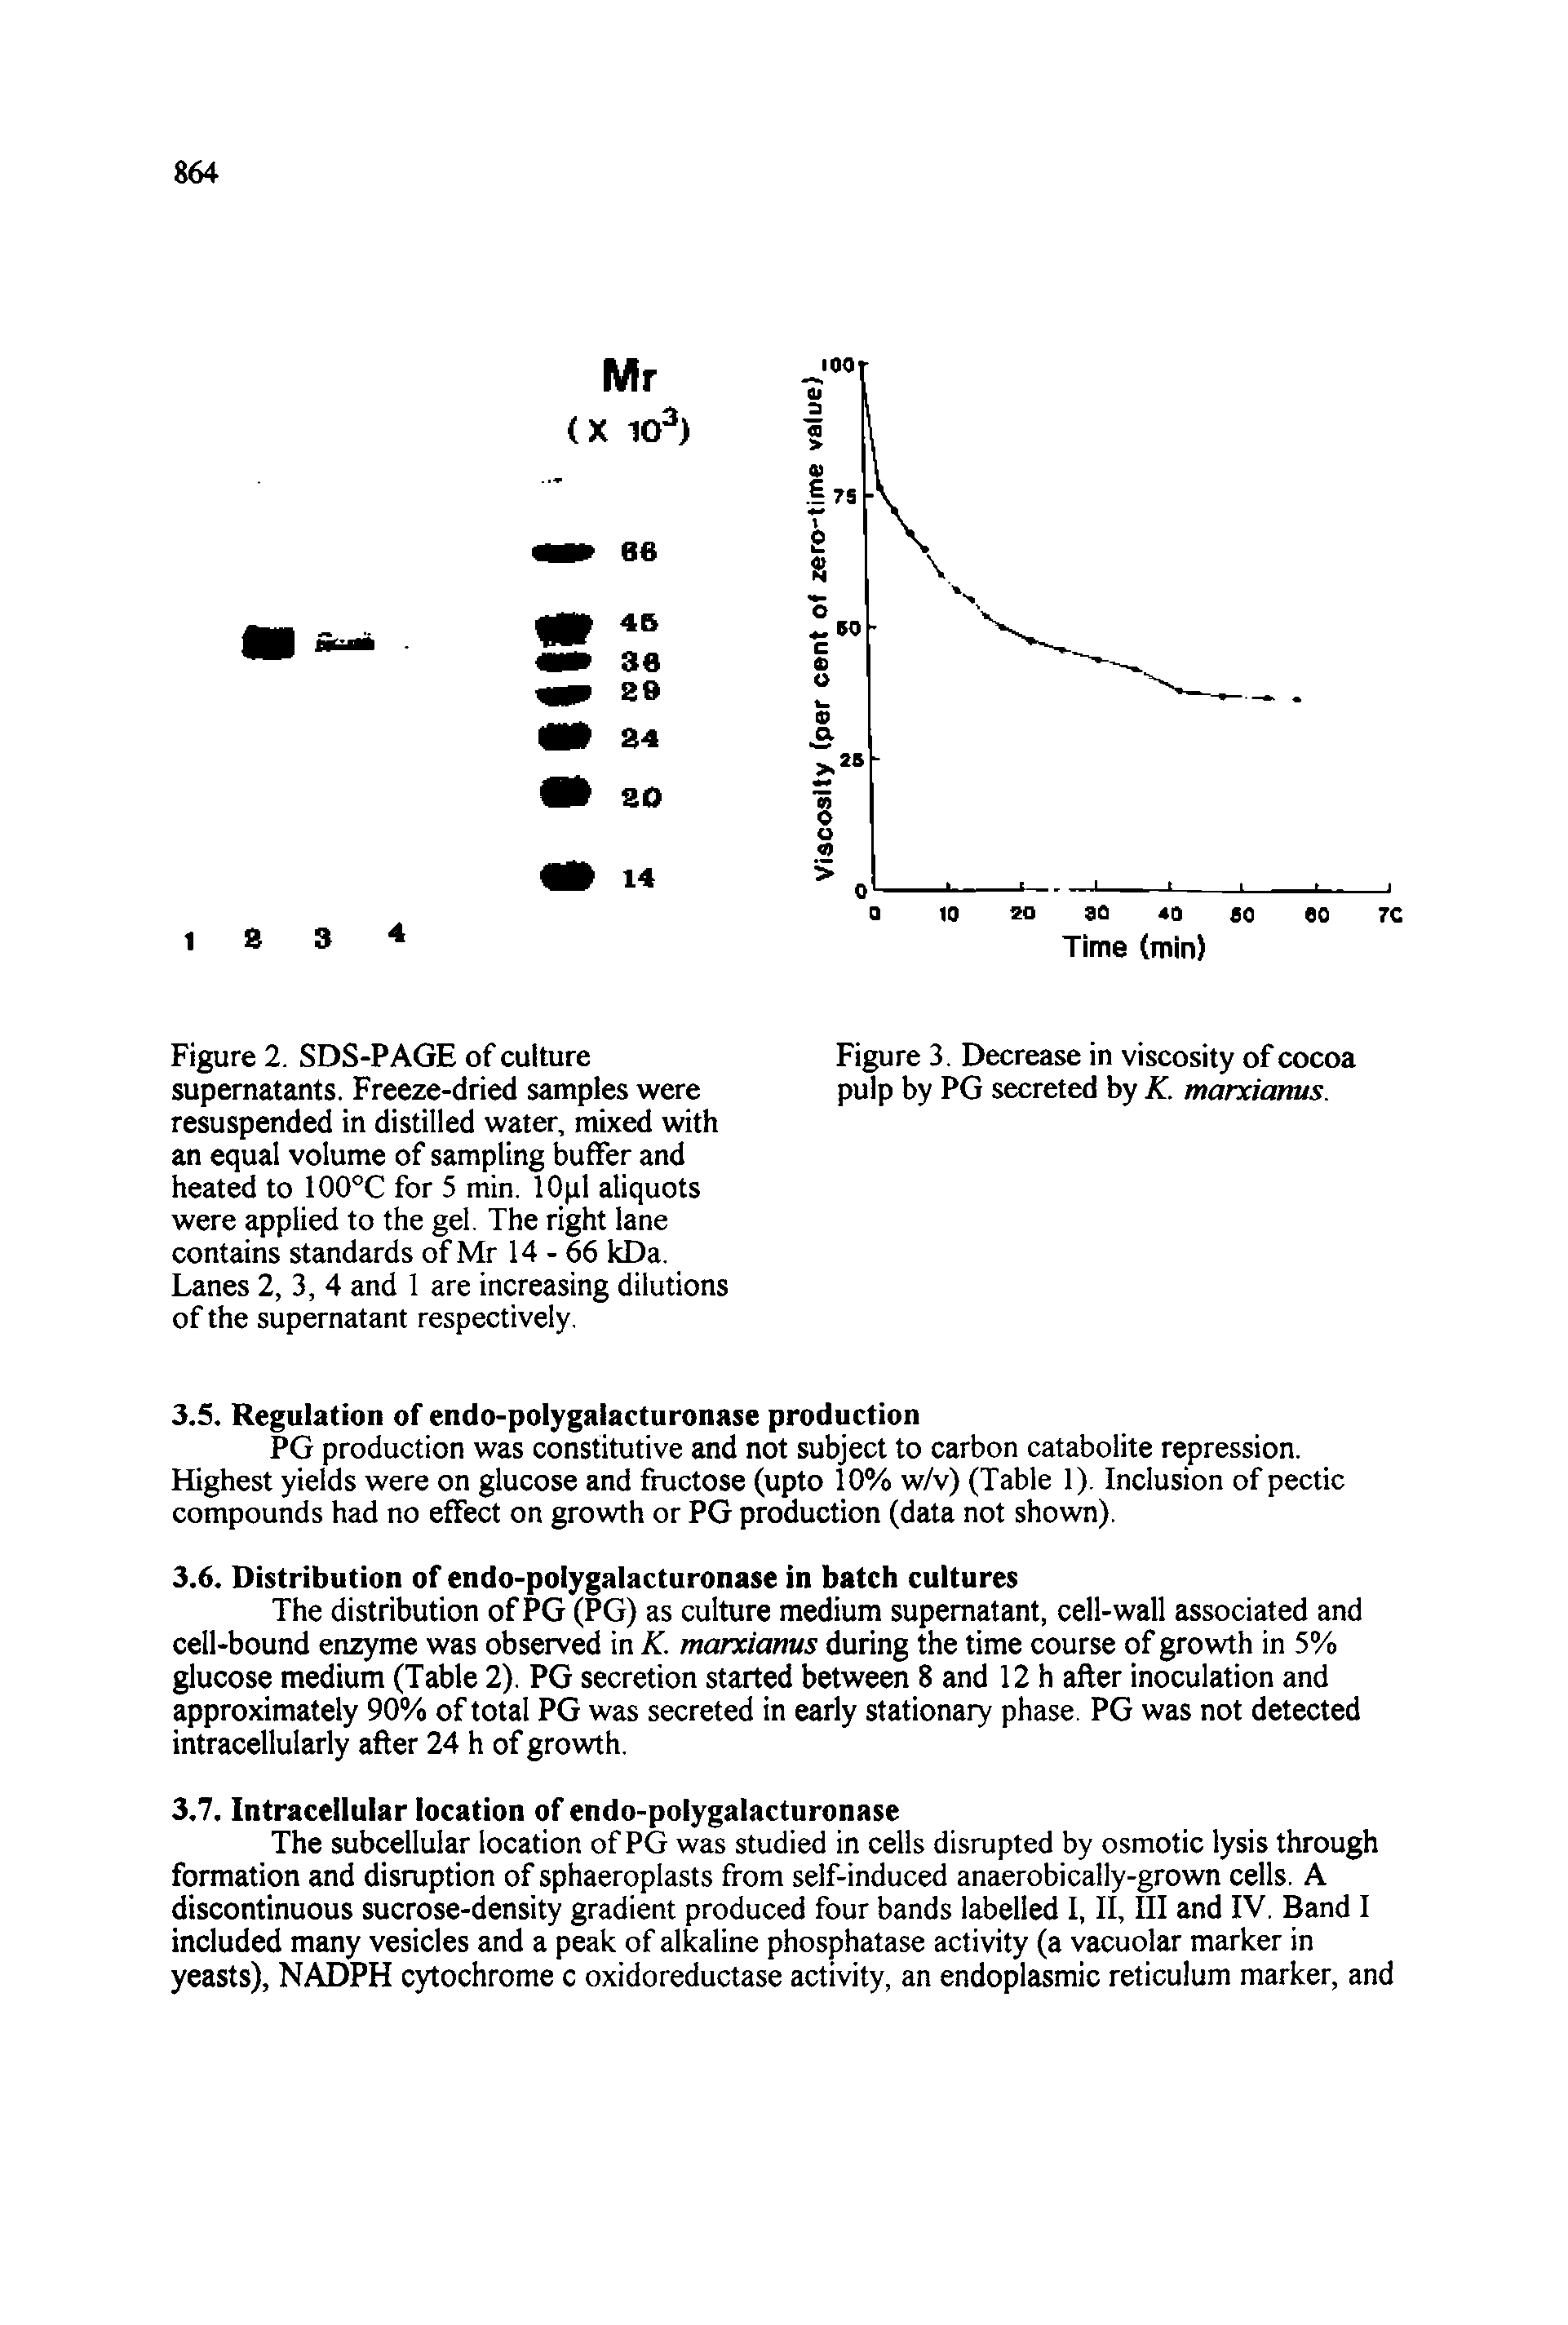 Figure 2. SDS-PAGE of culture supernatants. Freeze-dried samples were resuspended in distilled water, mixed with an equal volume of sampling buffer and heated to 100°C for 5 min. lOpl aliquots were applied to the gel. The right lane contains standards of Mr 14-66 kDa. Lanes 2, 3, 4 and 1 are increasing dilutions of the supernatant respectively.